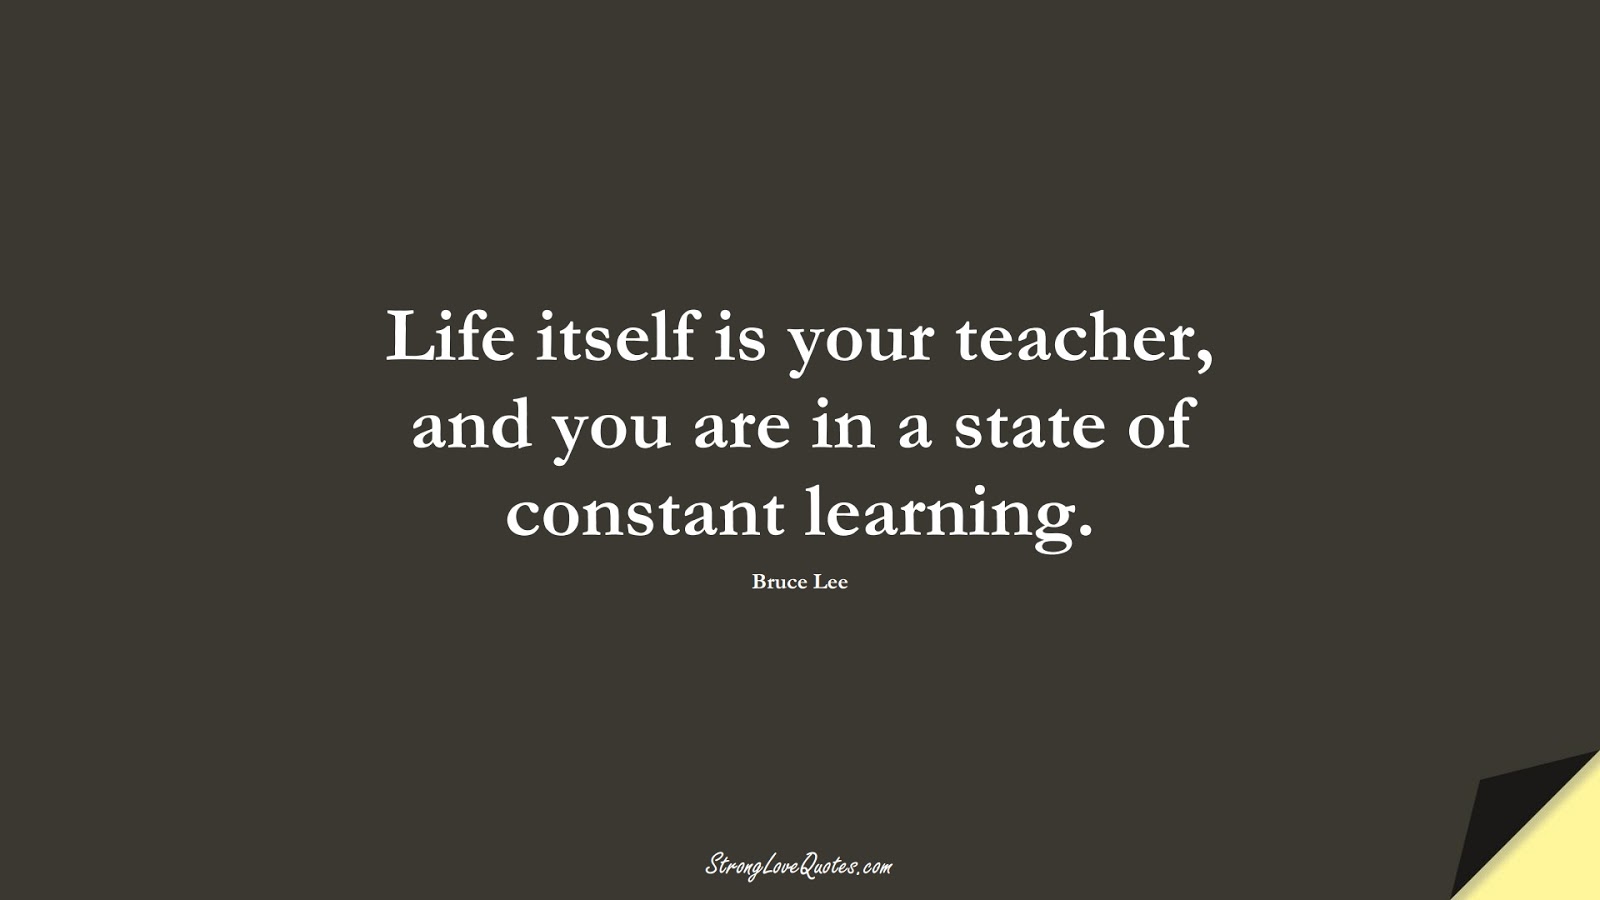 Life itself is your teacher, and you are in a state of constant learning. (Bruce Lee);  #EducationQuotes